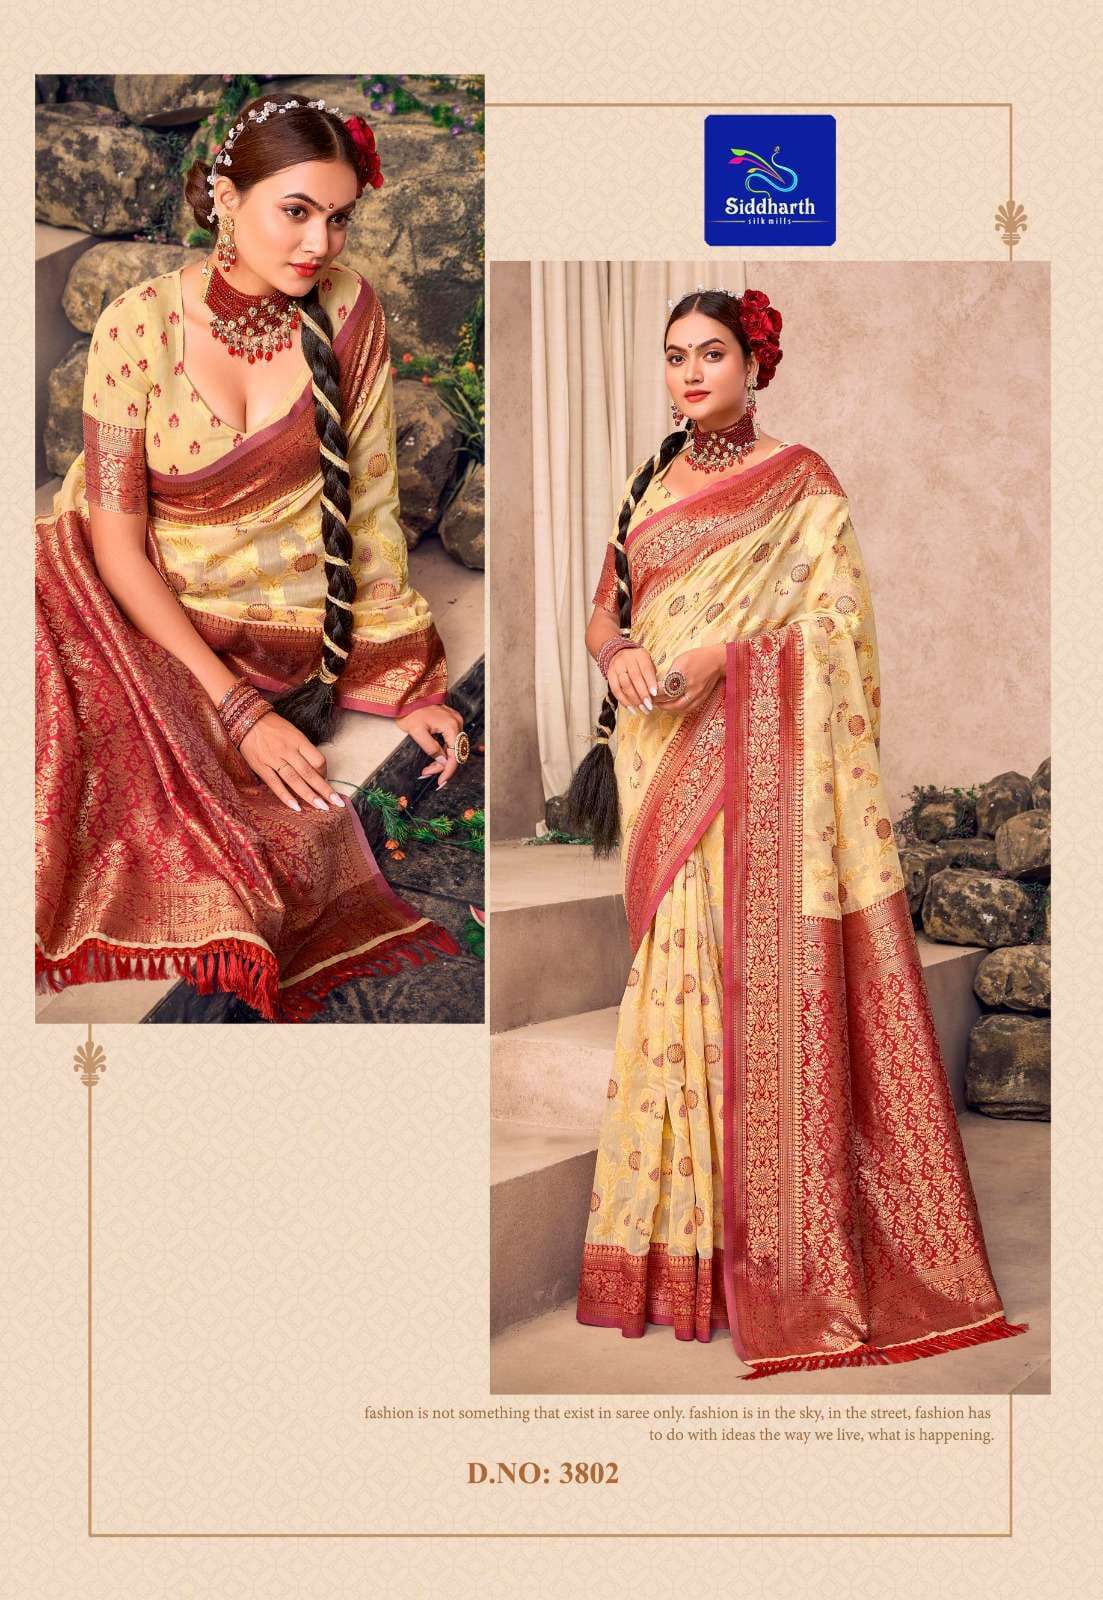 Dhaga Fashion - The fit, The glam, the shimmer. This saree is a perfect  choice for you to wear on the coming wedding season. The gorgeous silk saree  looks amazing and the